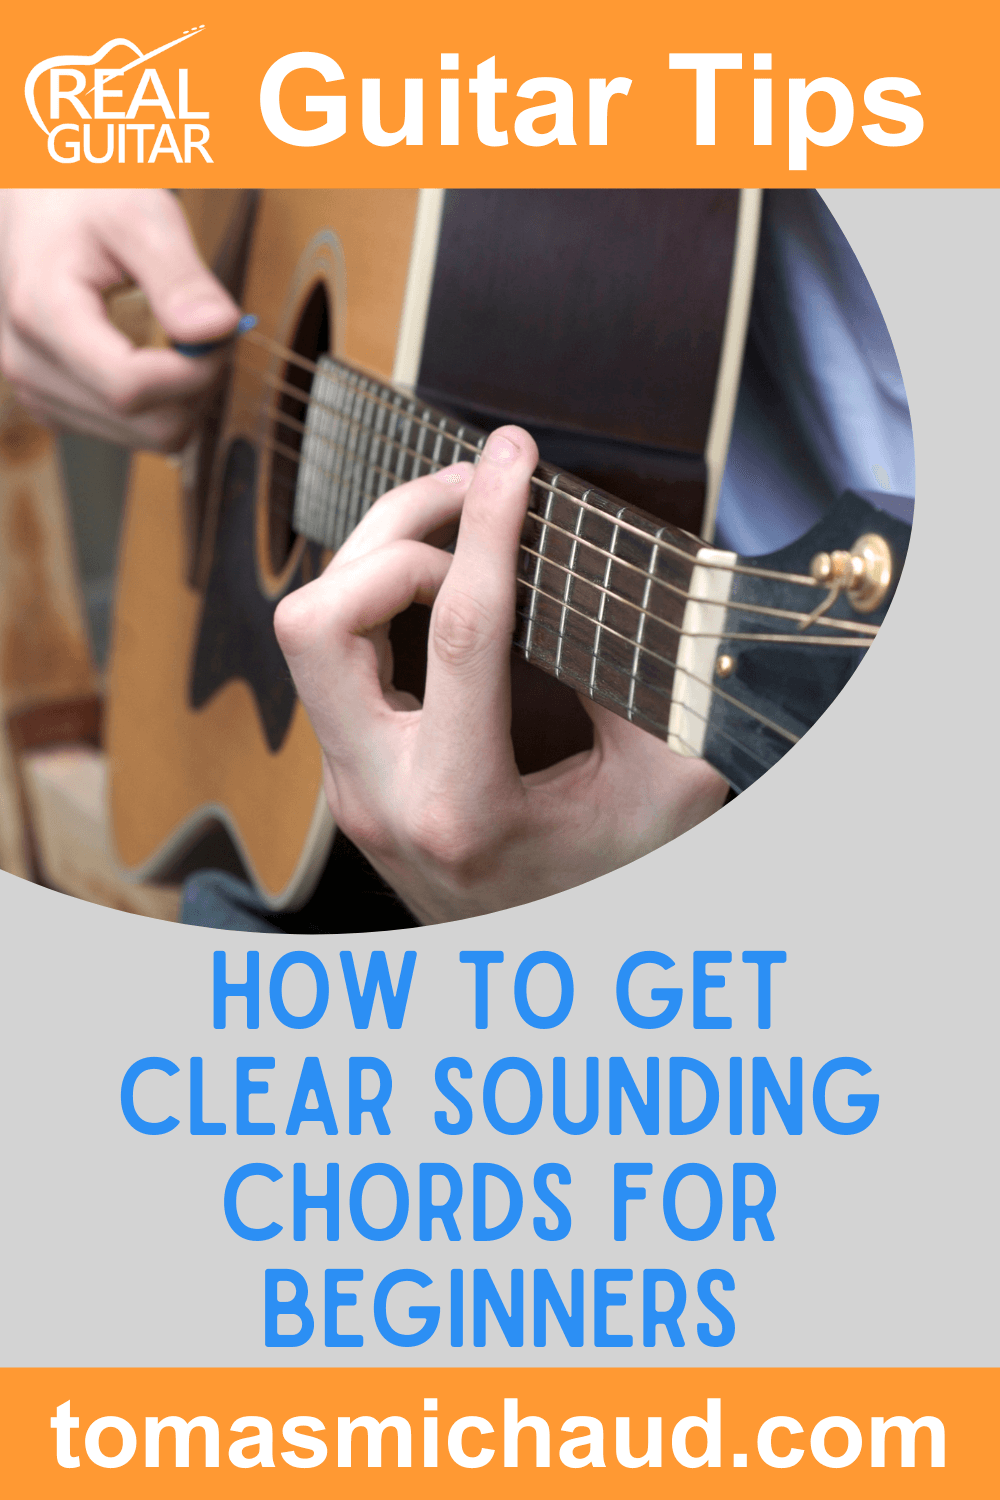 How To Get Clear Sounding Chords For Beginners